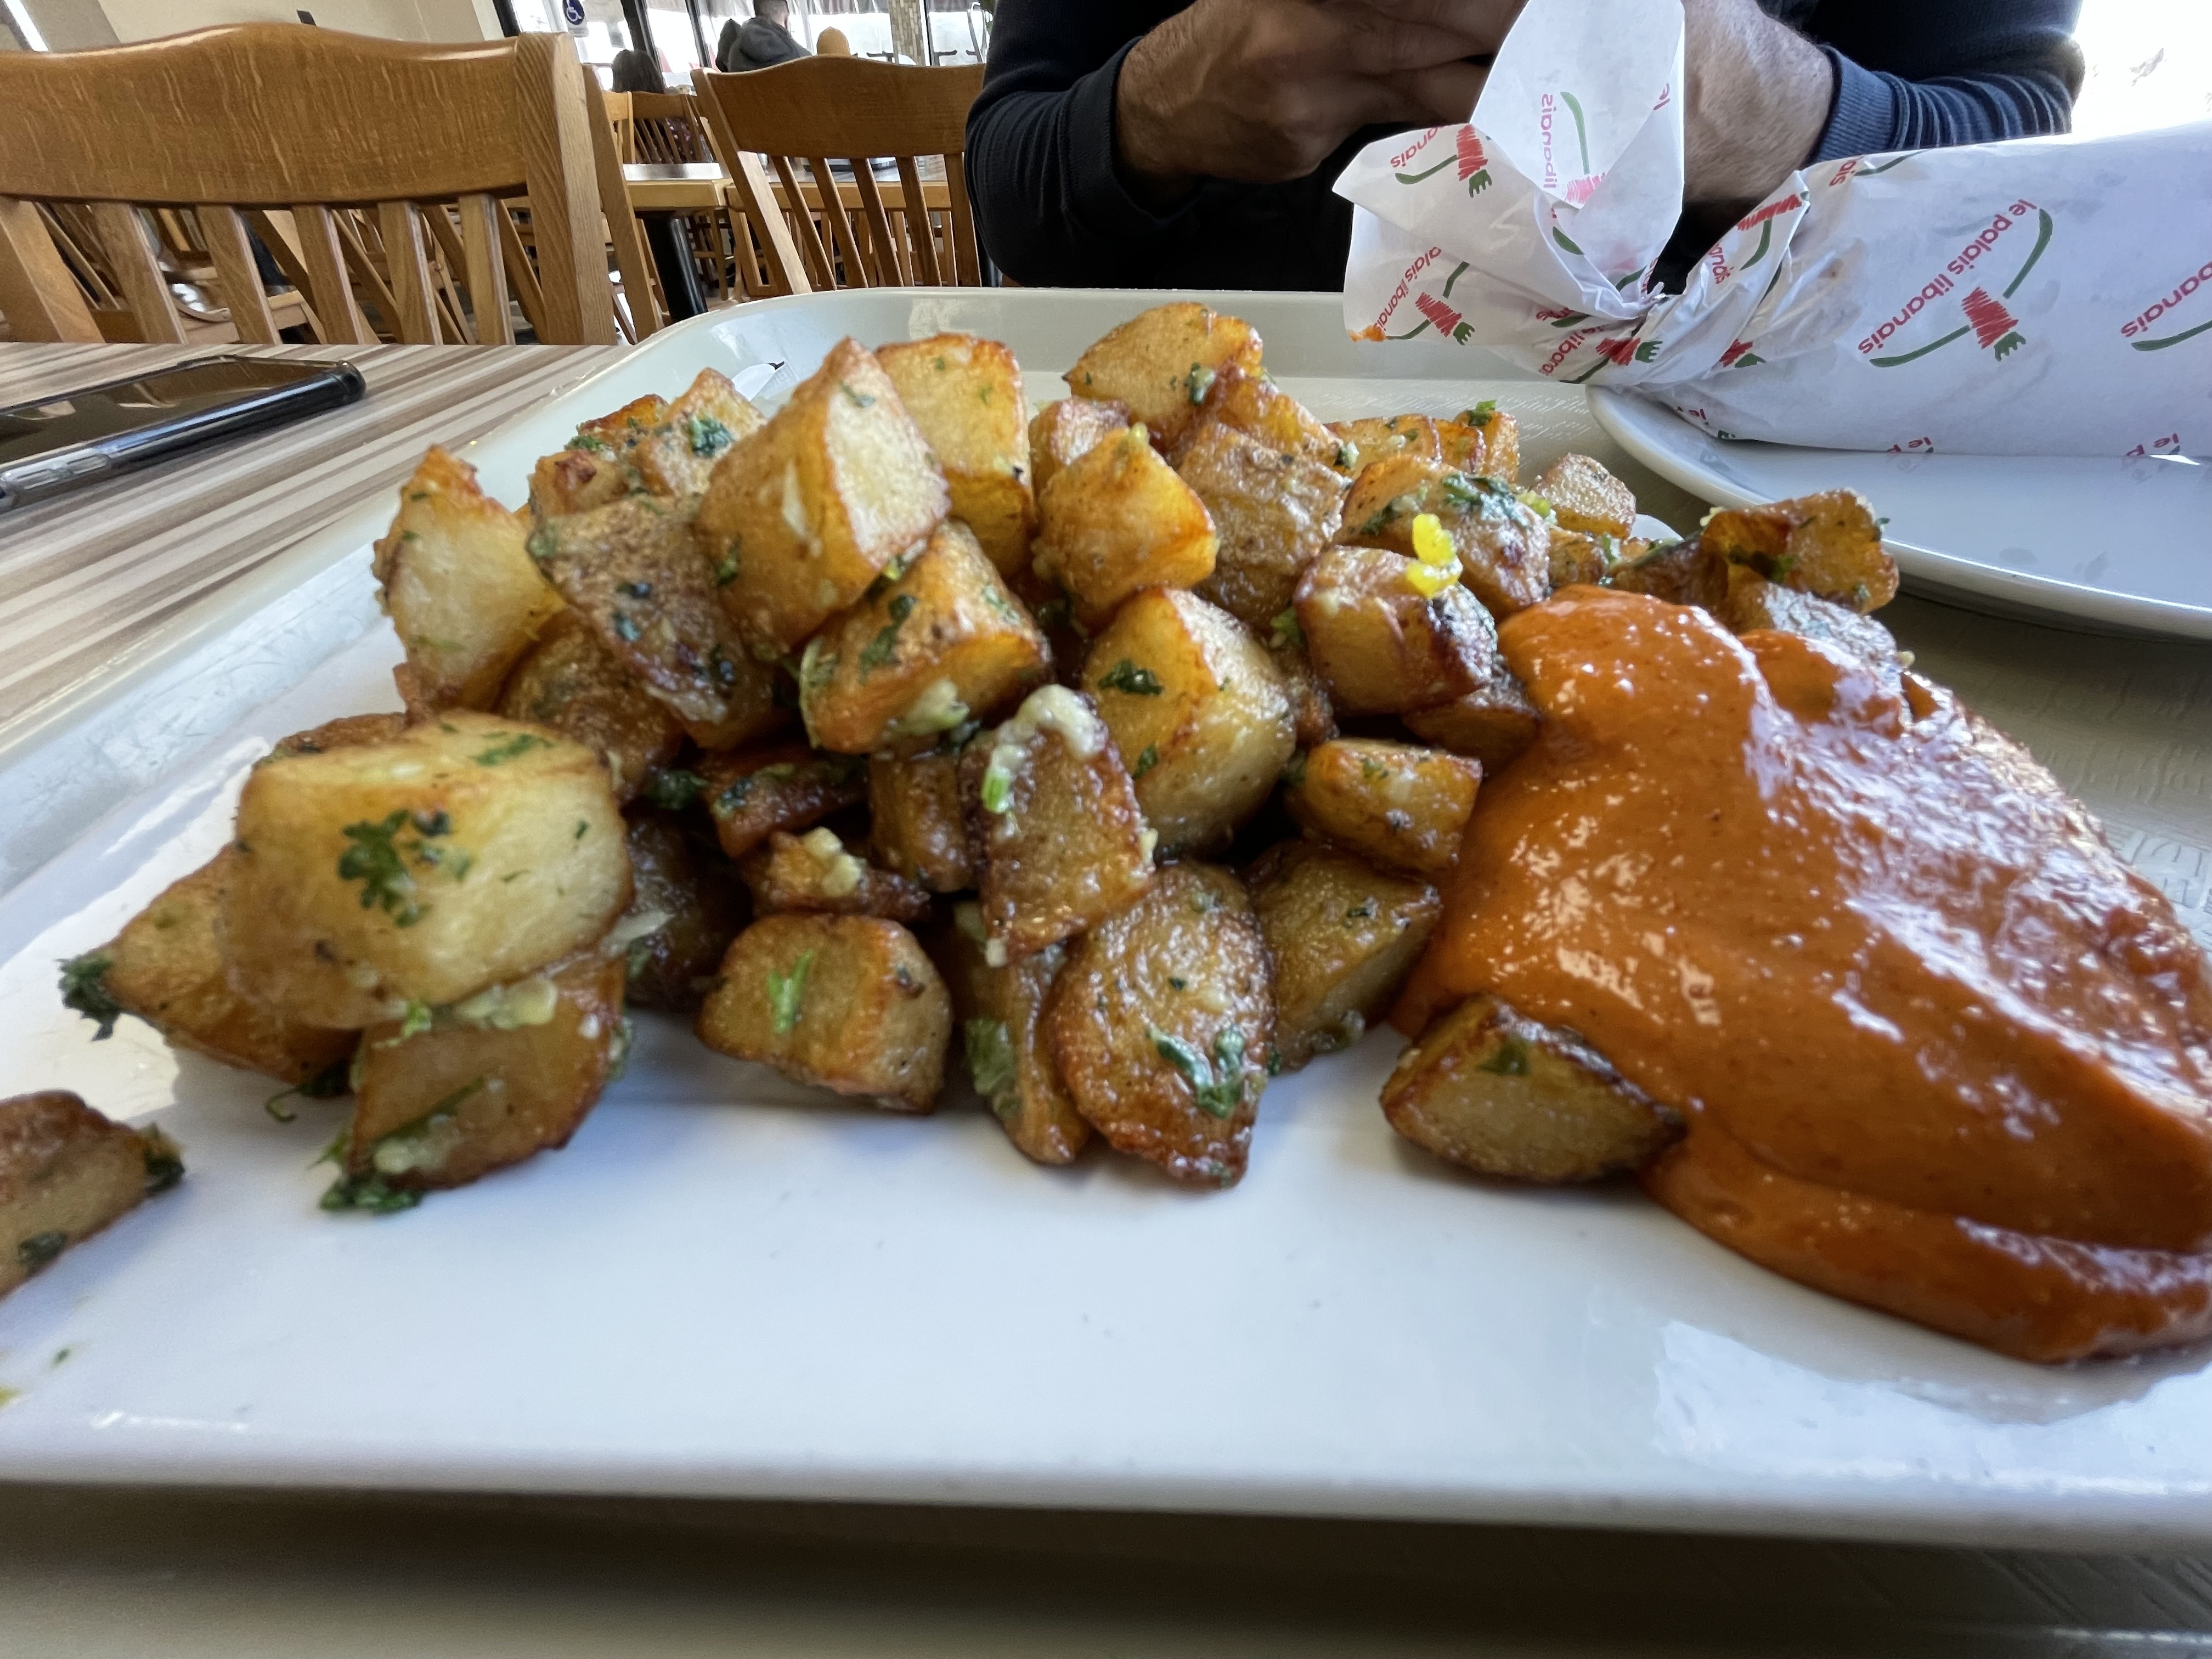 These garlic potatoes are some of the best in the region